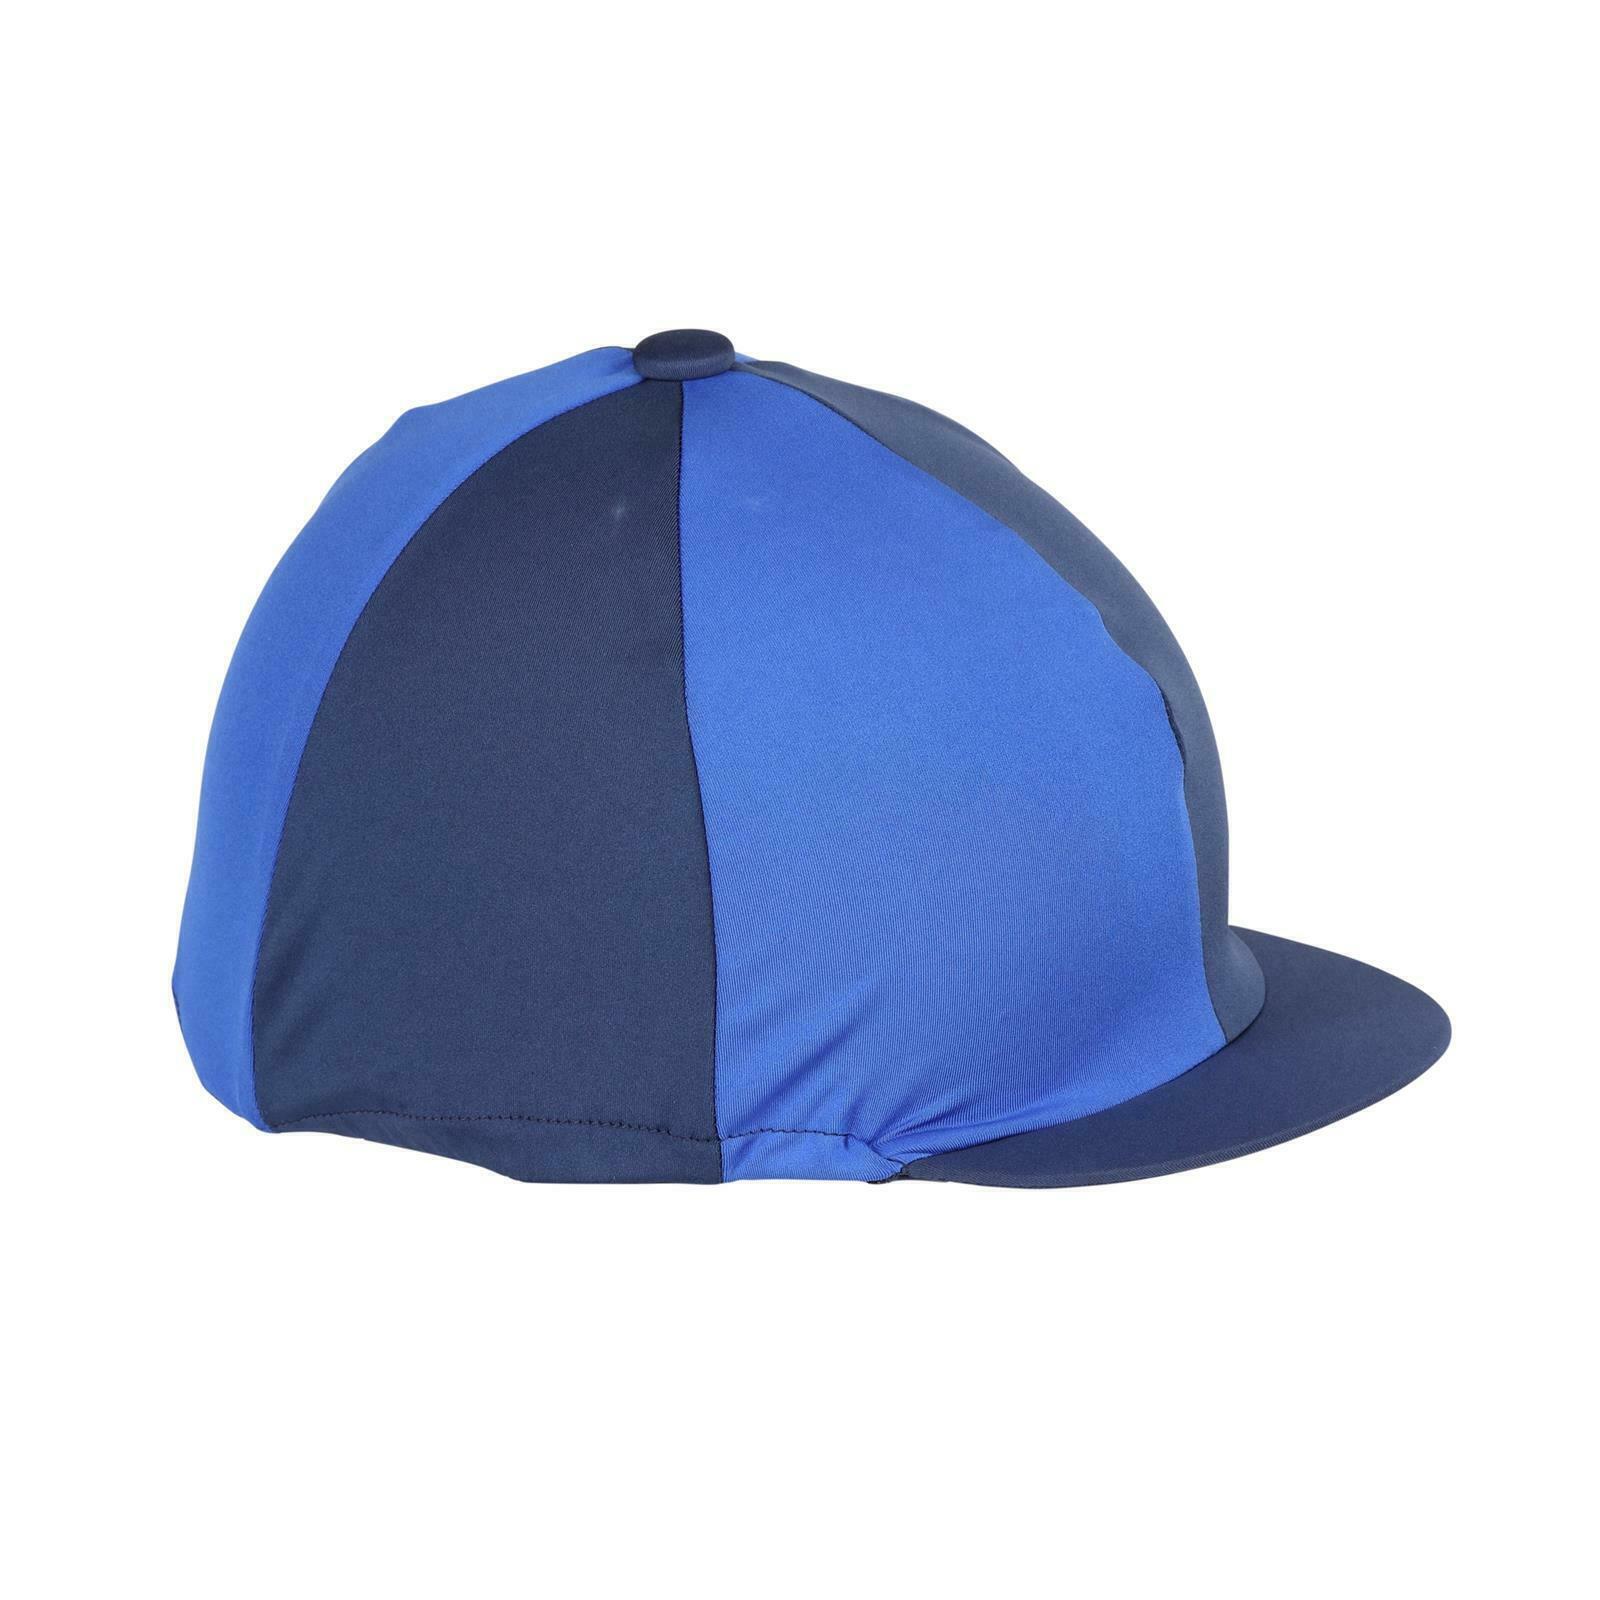 SHIRES Hat Cover (Navy/Royal Blue)